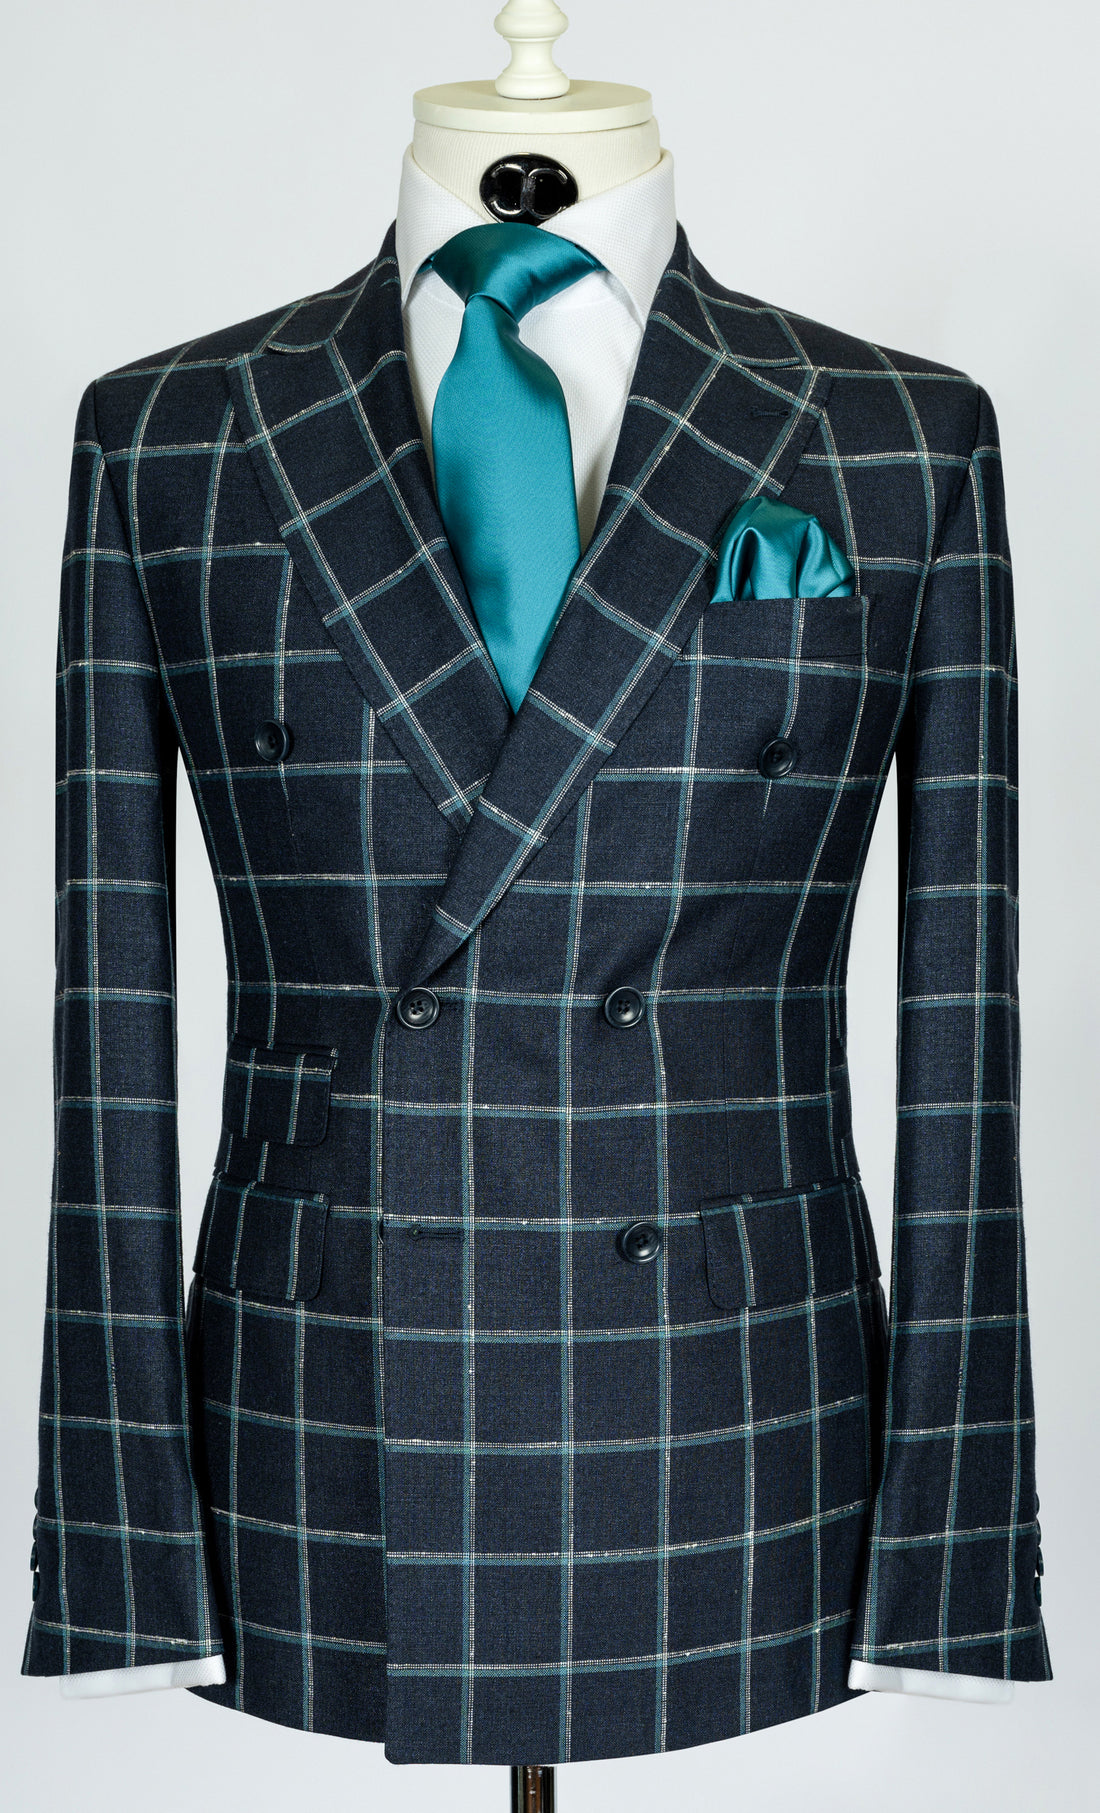 Vitale Barberis - Navy blue with turquoise windowpane double breasted 2-piece slim fit suit